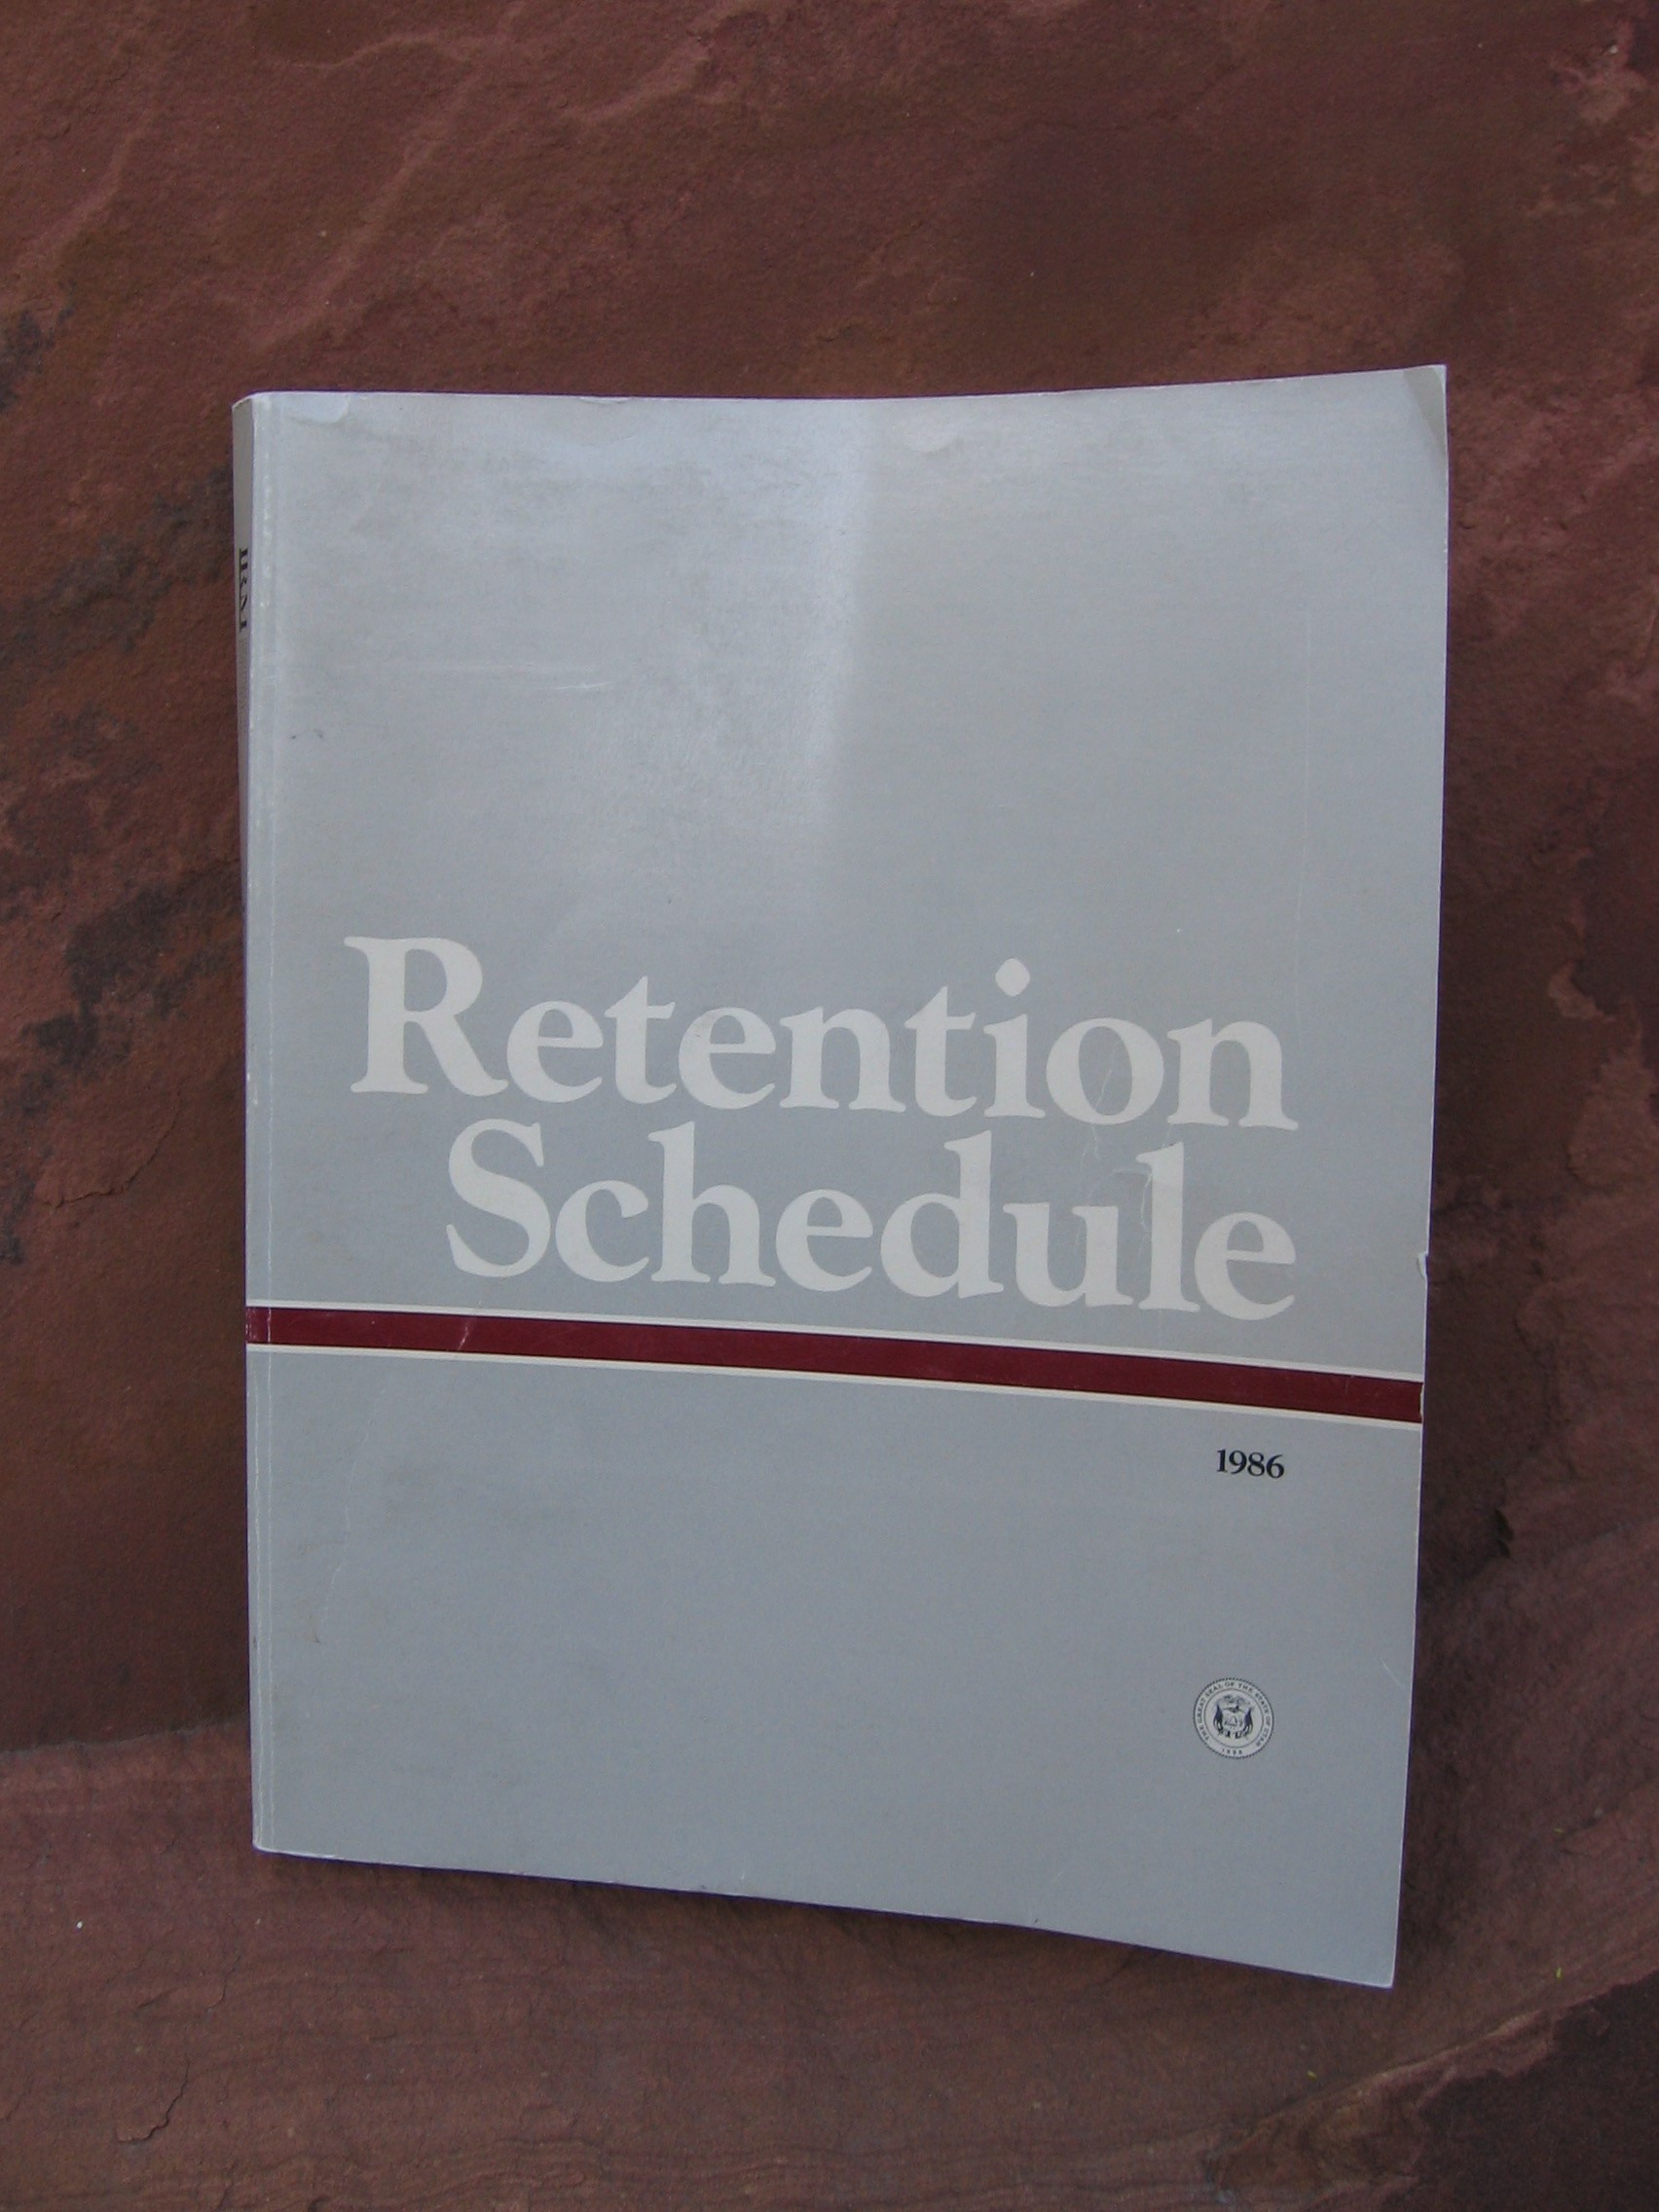 Featured image for “Moving Utah's General Retention Schedules Forward”